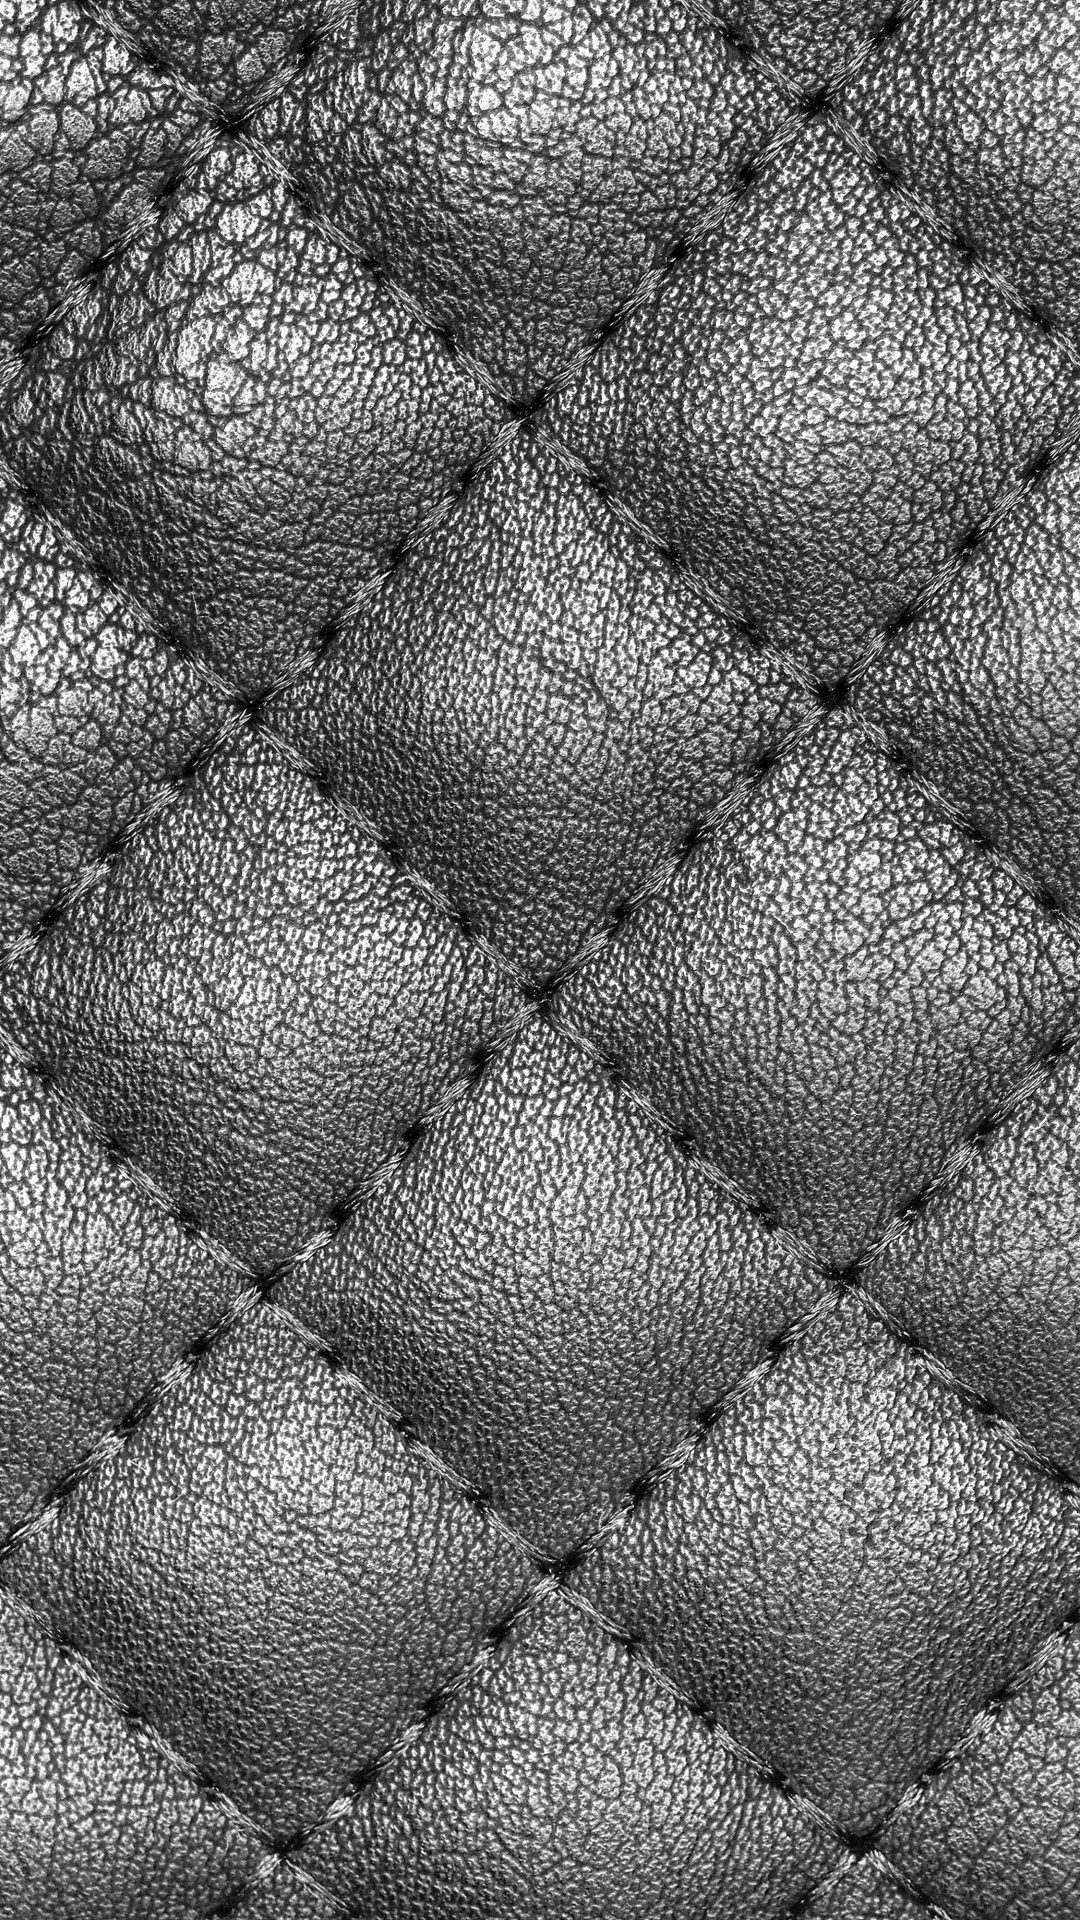 Grey and Black Knit Textile. Wallpaper in 1080x1920 Resolution